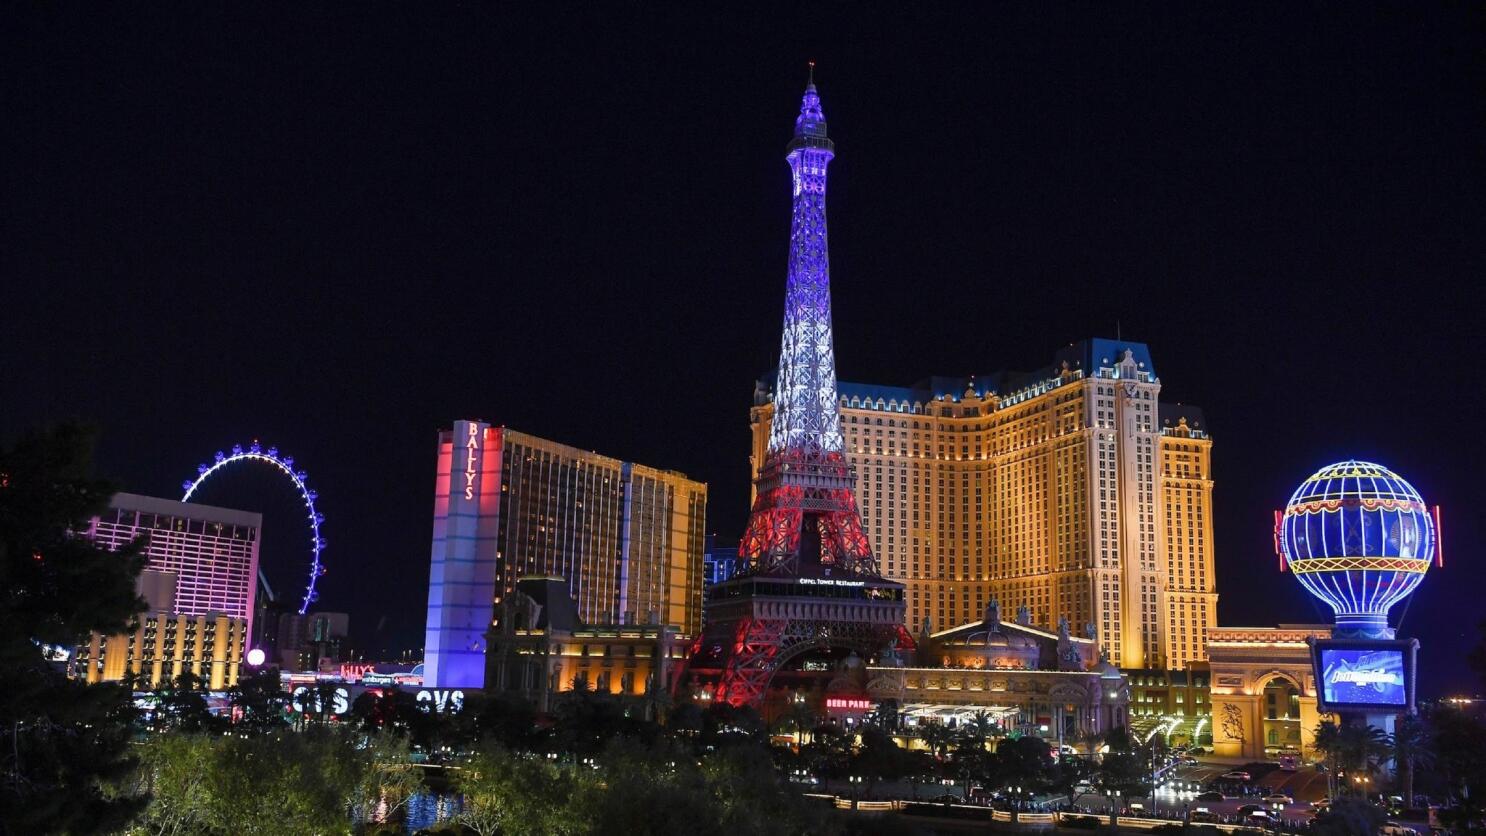 Now Las Vegas' Eiffel Tower has a flashy and colorful light show